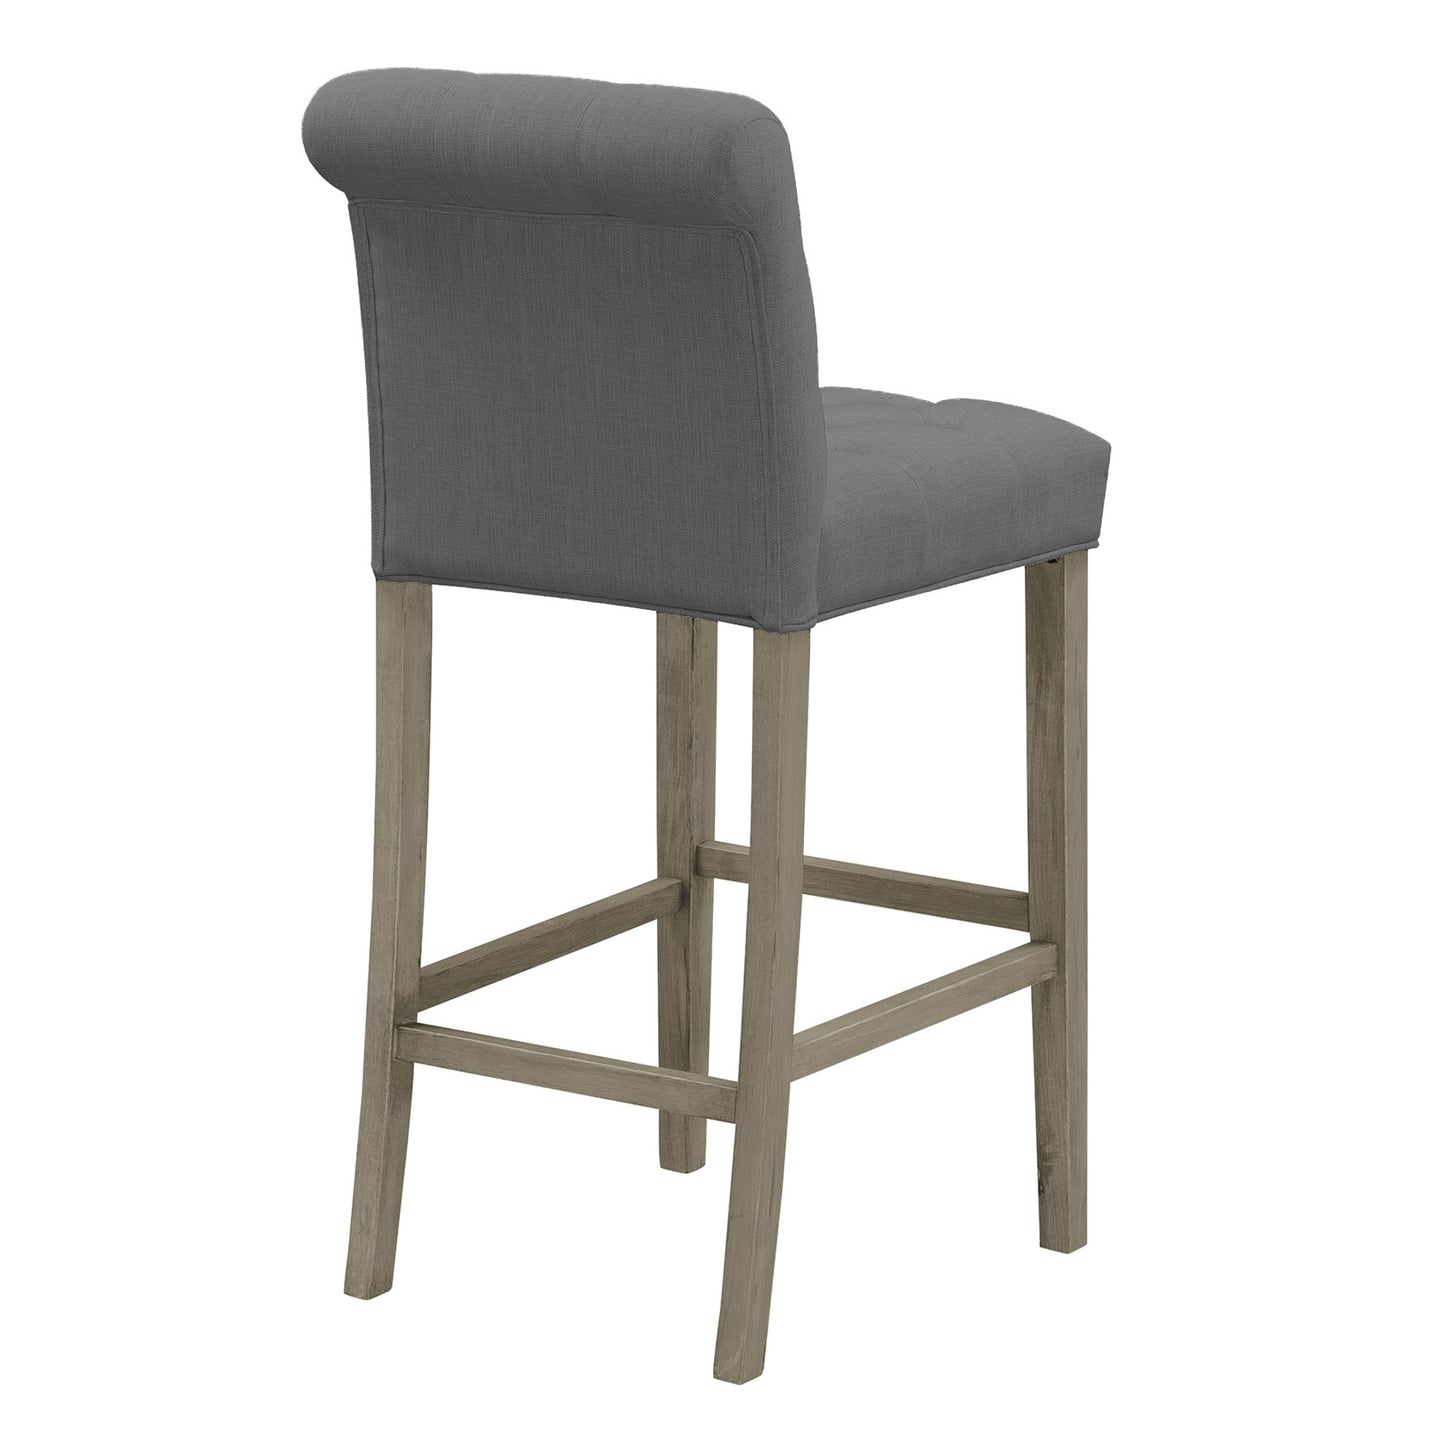 Set of 2 Aleen Grey Fabric Bar Stool with Roll Back Design and Tufted Buttons